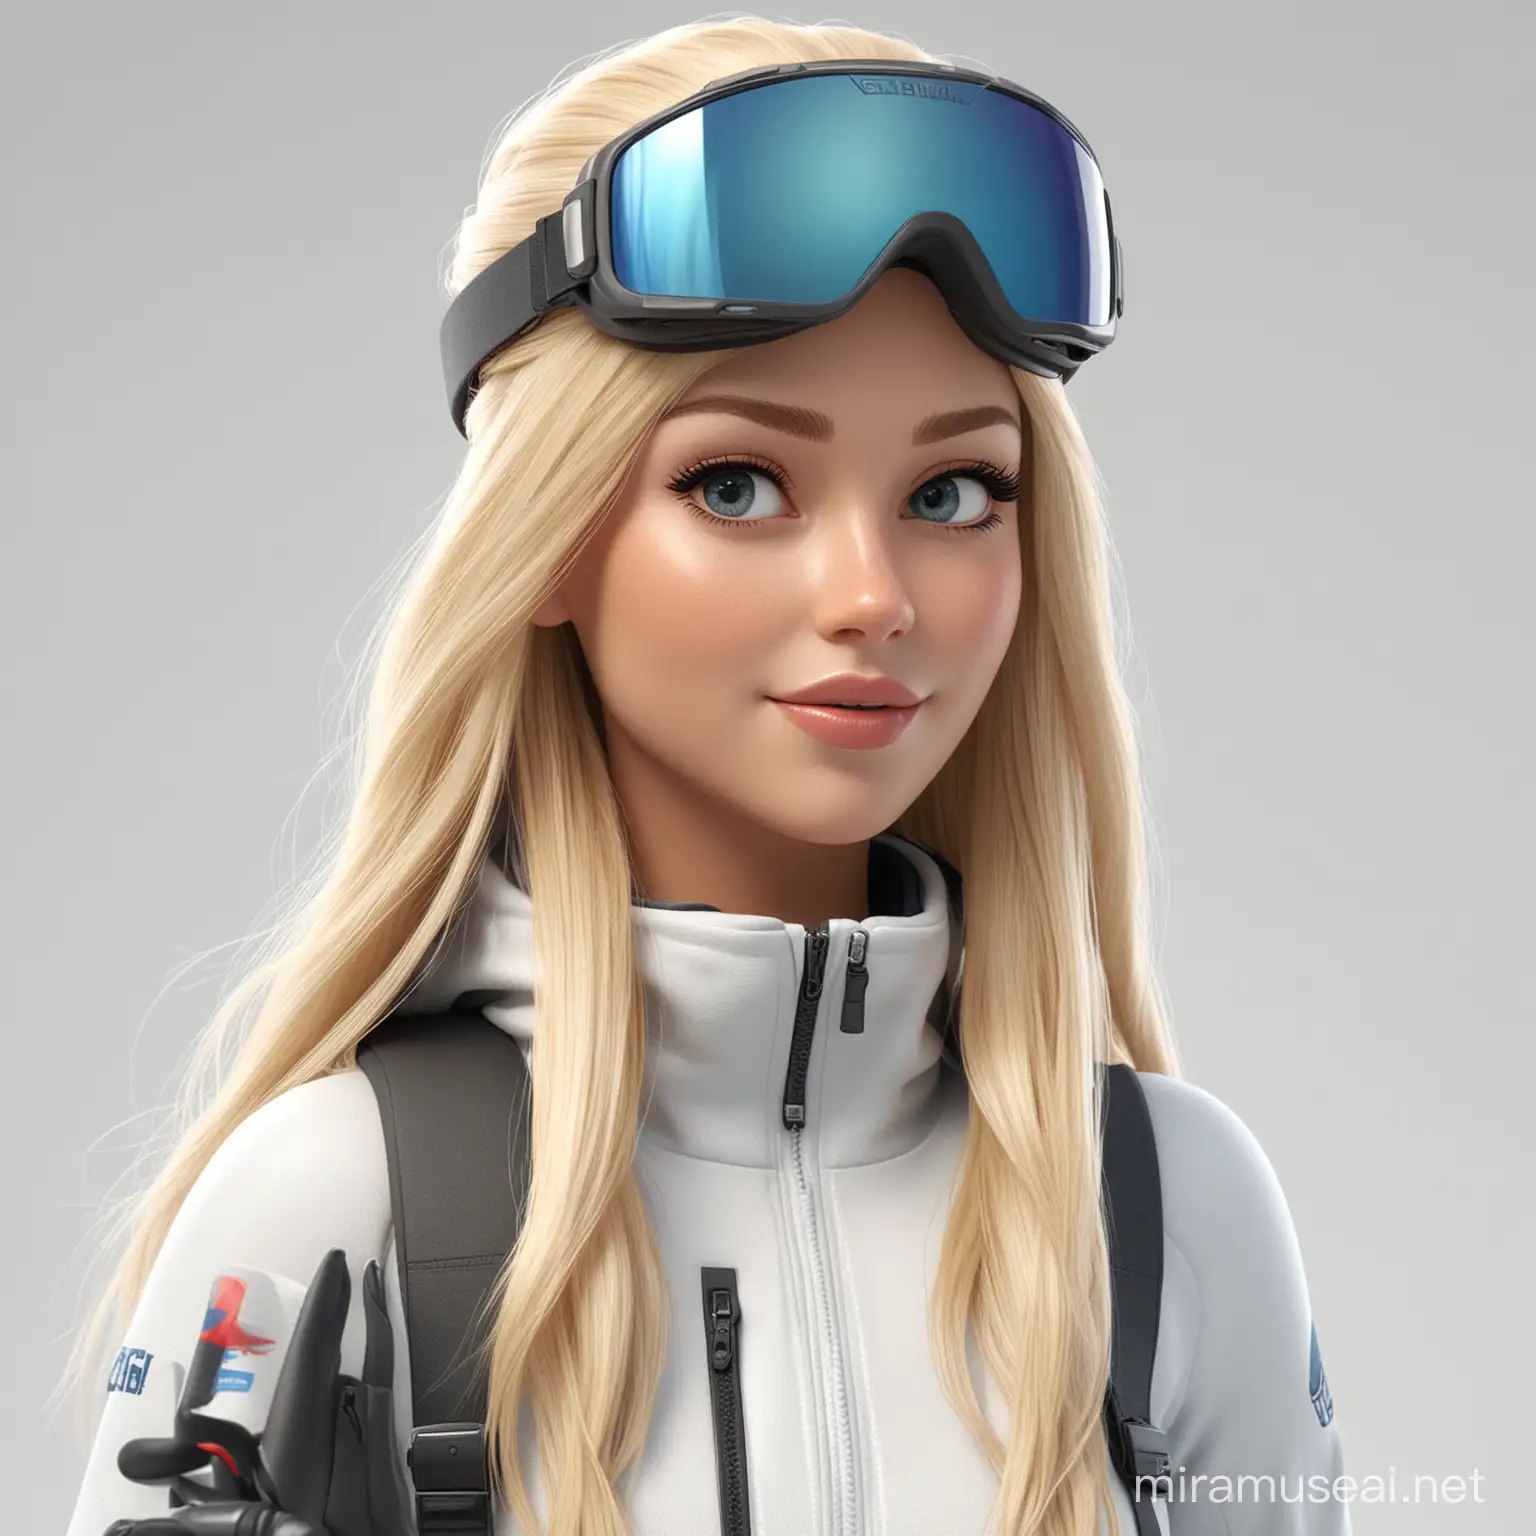 Blond Ski Instructor Cartoon Character in High Definition 3D Render